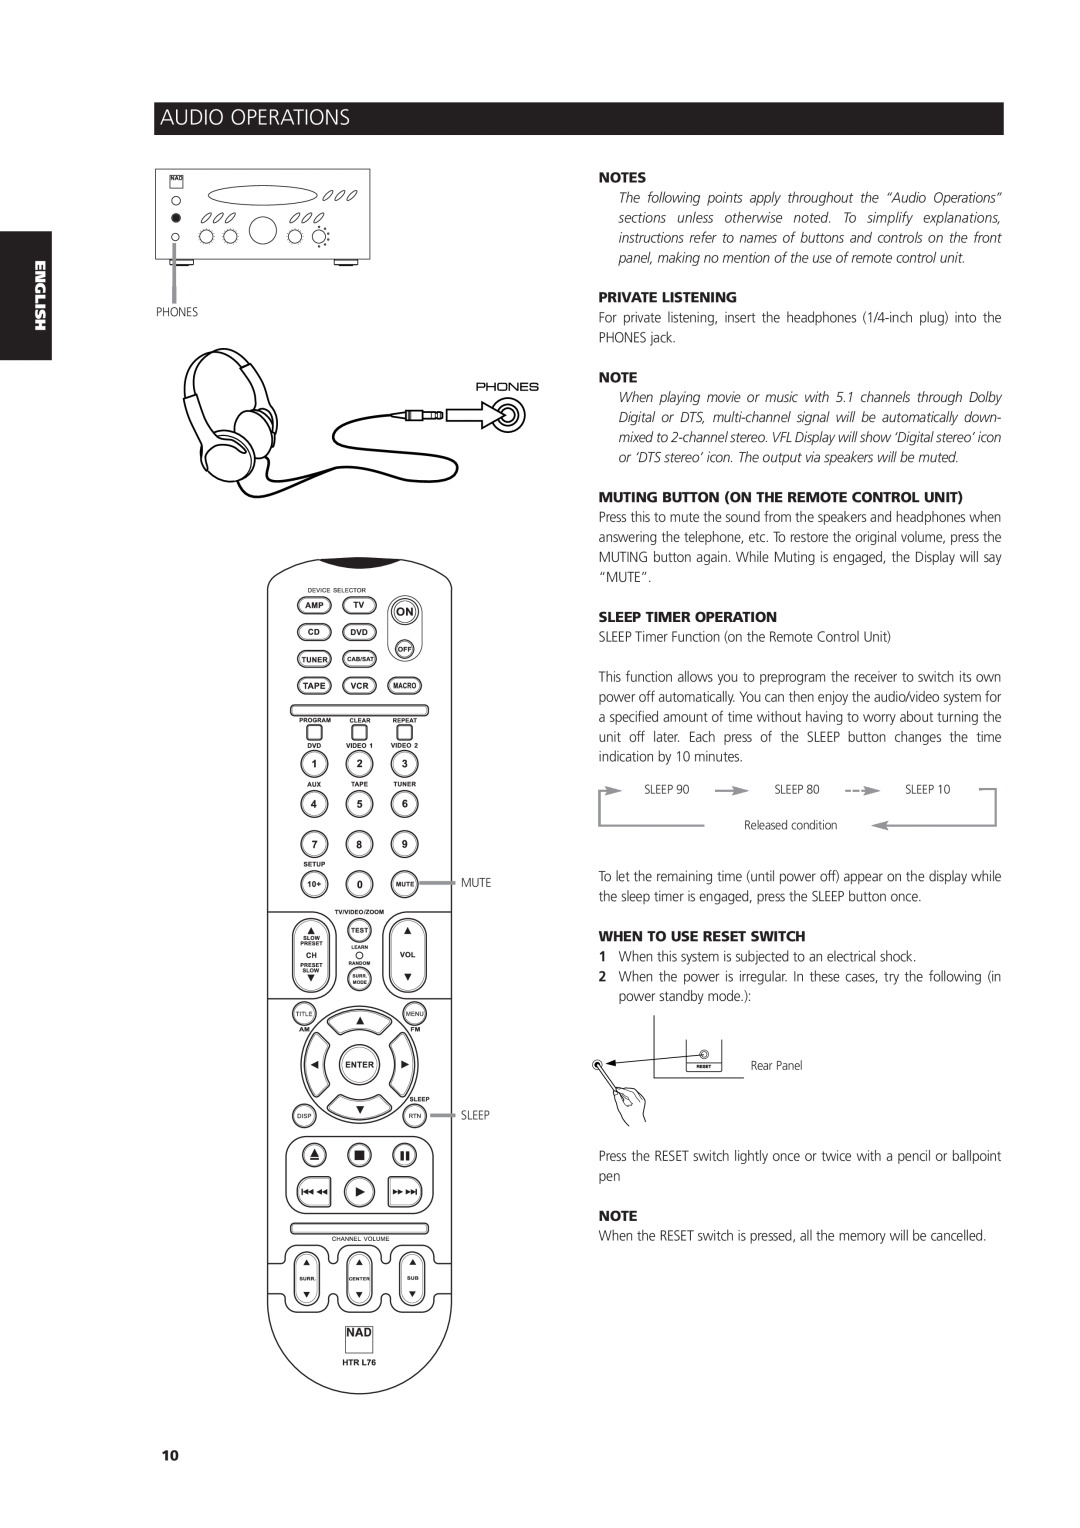 NAD L 76 owner manual Audio Operations, Private Listening, Muting Button On The Remote Control Unit, Sleep Timer Operation 